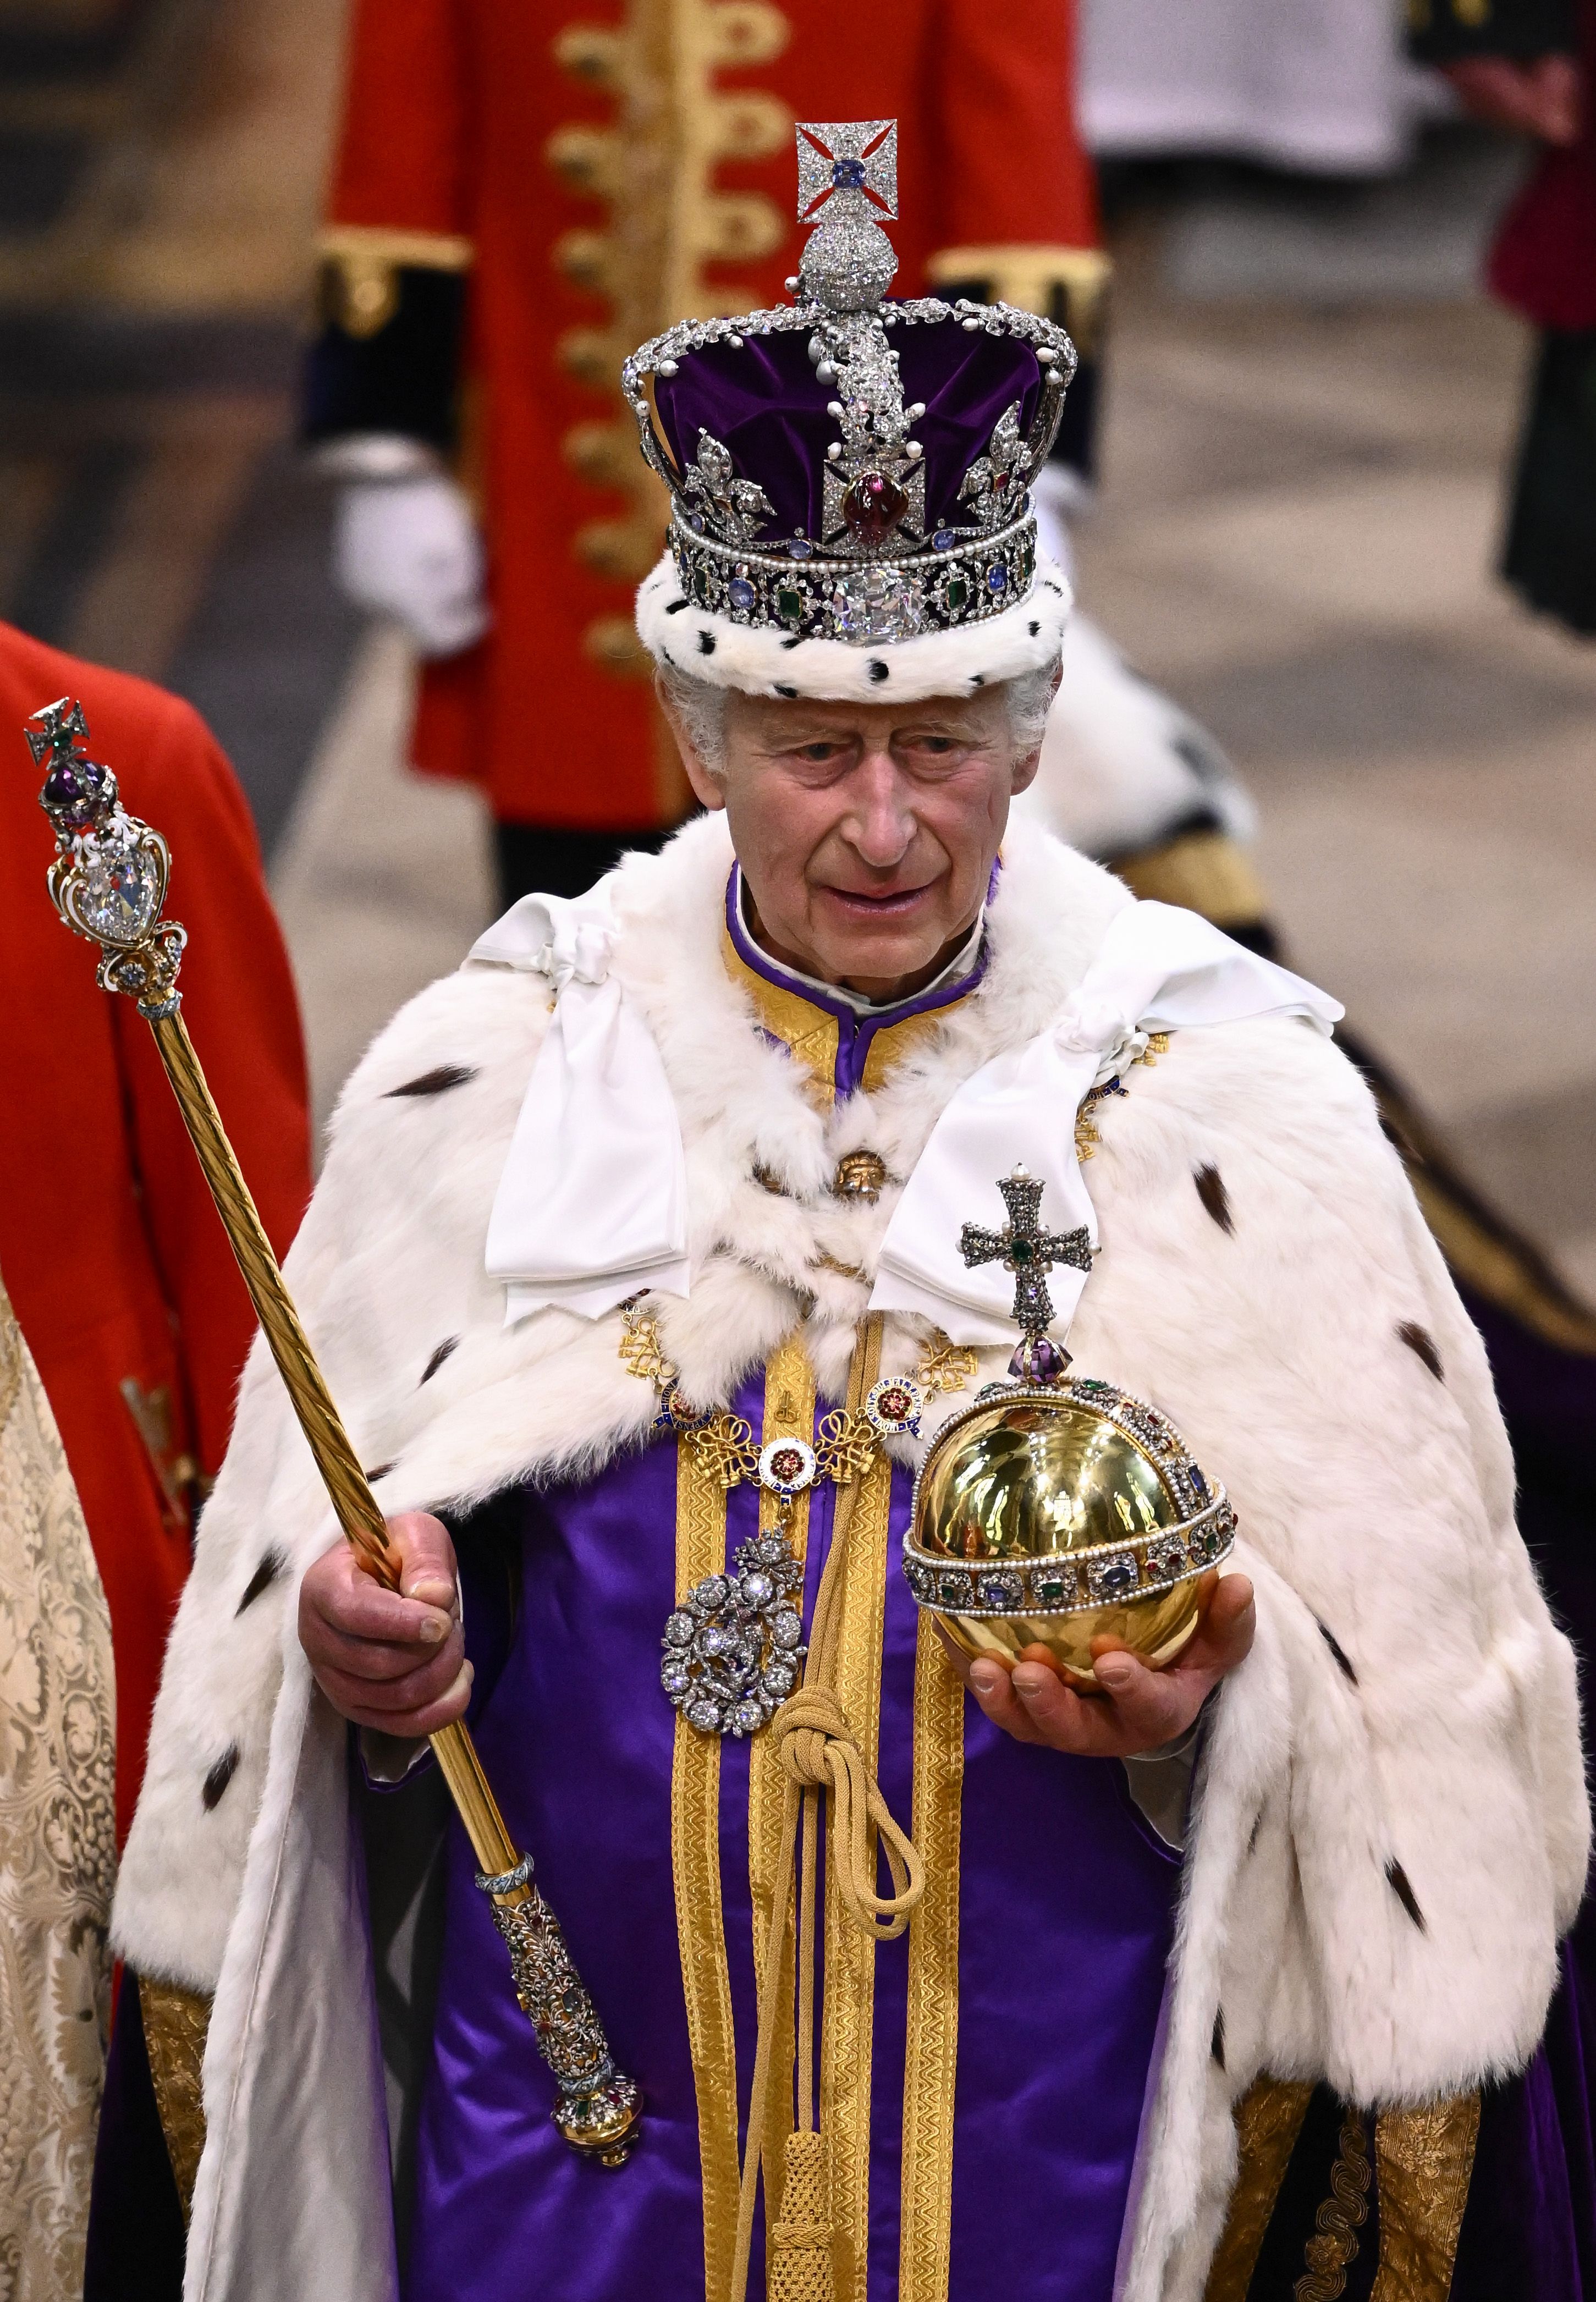 The 17 Moments You Missed from King Charles III's Coronation